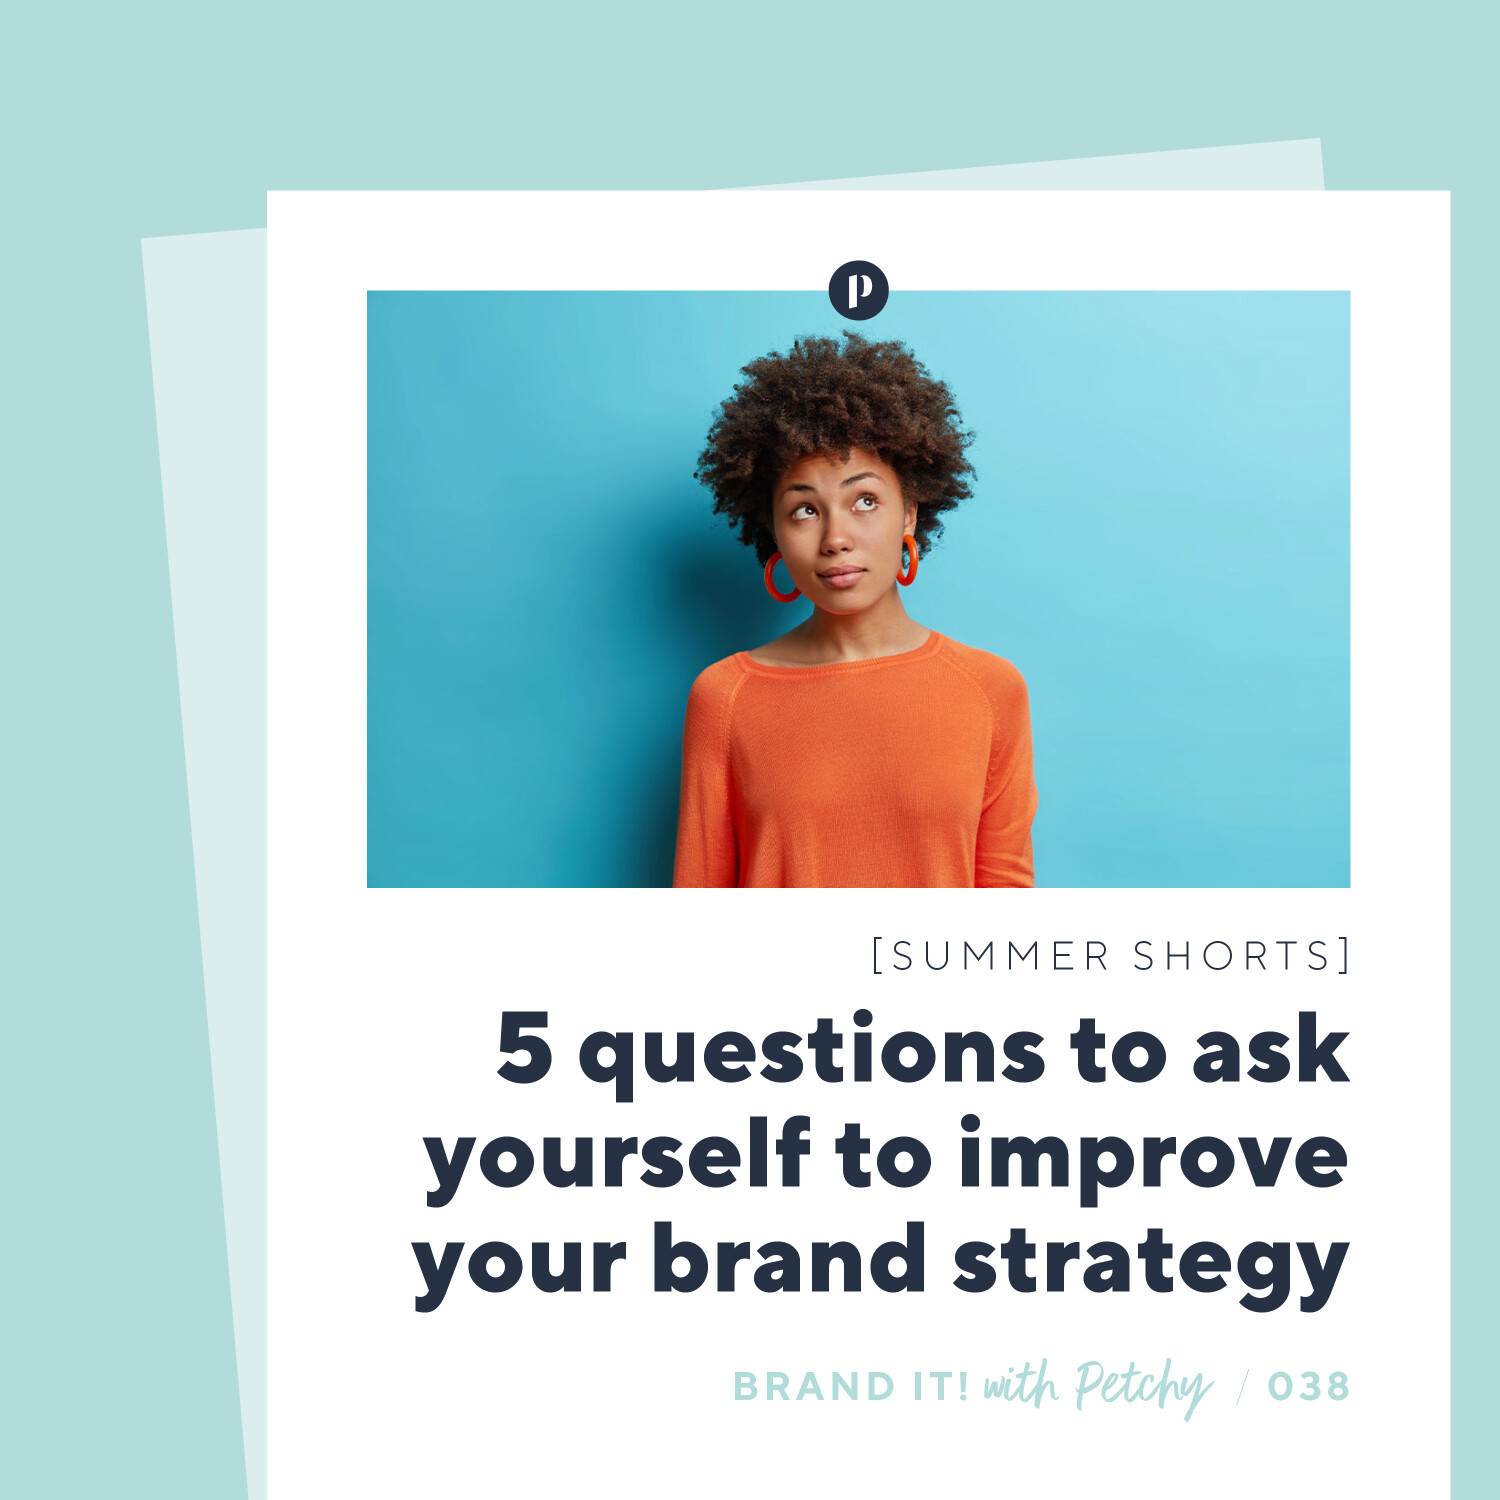 [Summer Shorts] Five questions to ask yourself to instantly improve your brand strategy